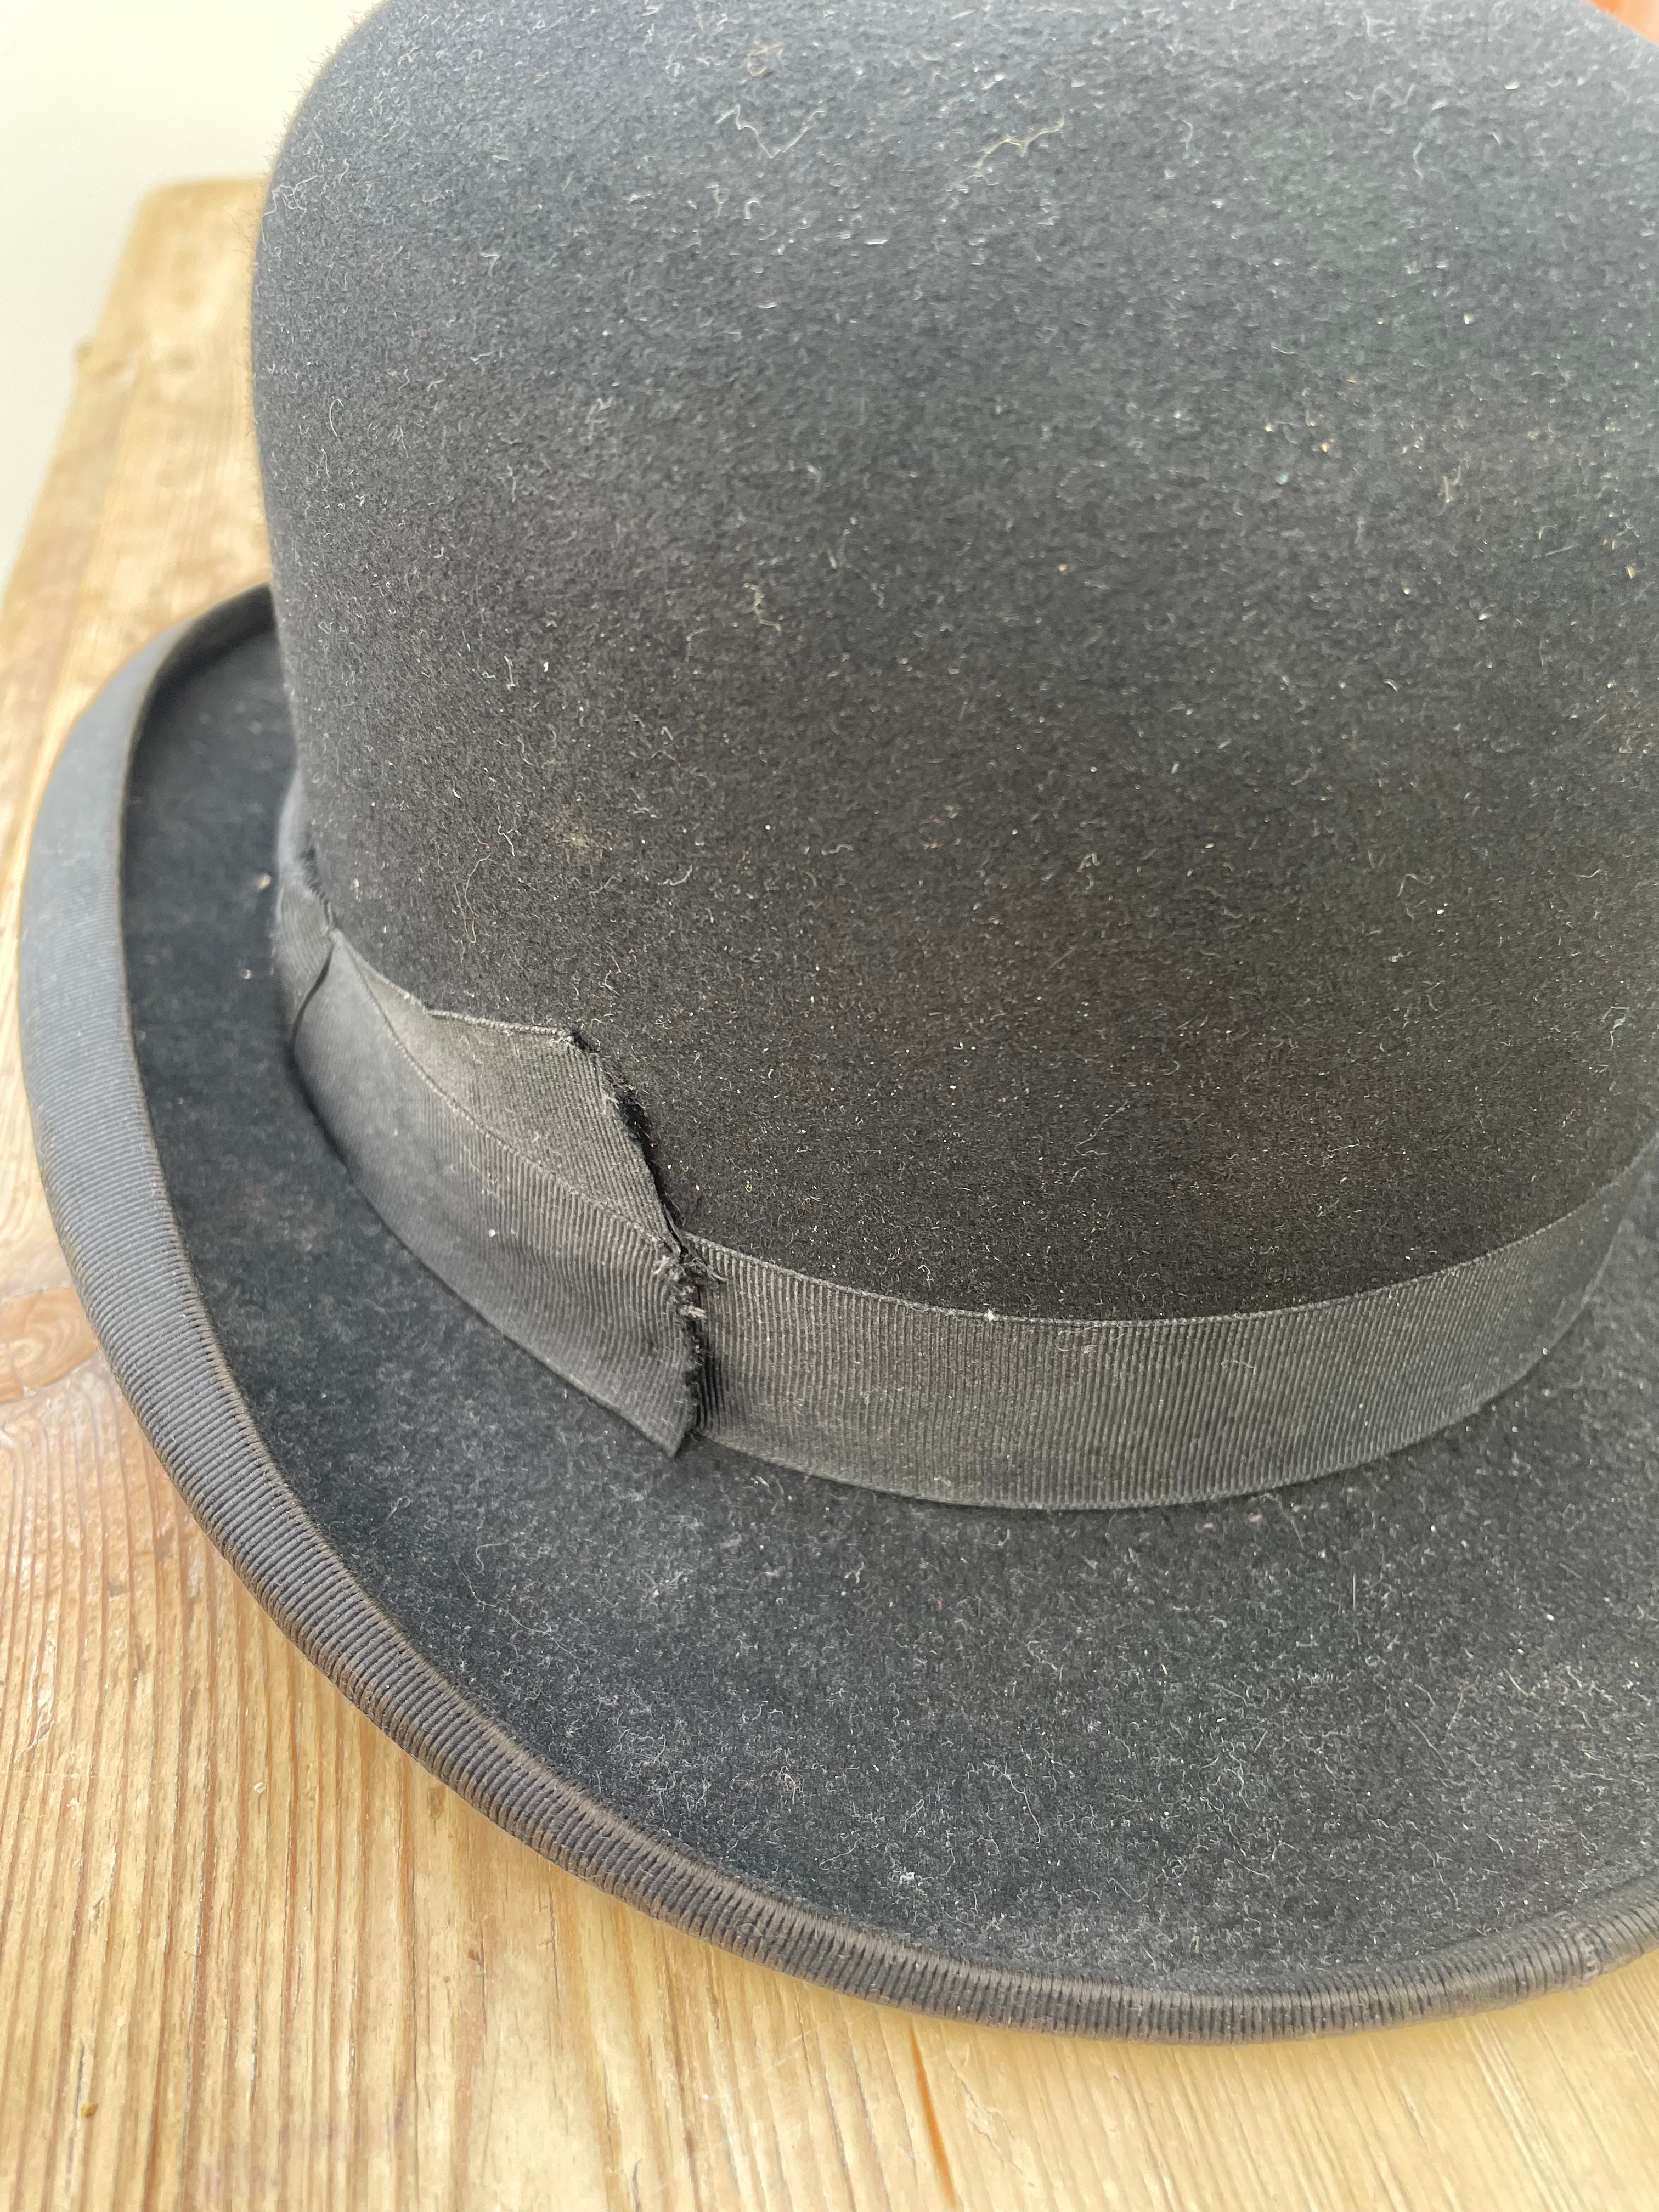 Original 1930s Bowler Hat made by G.A. Dunn & Co